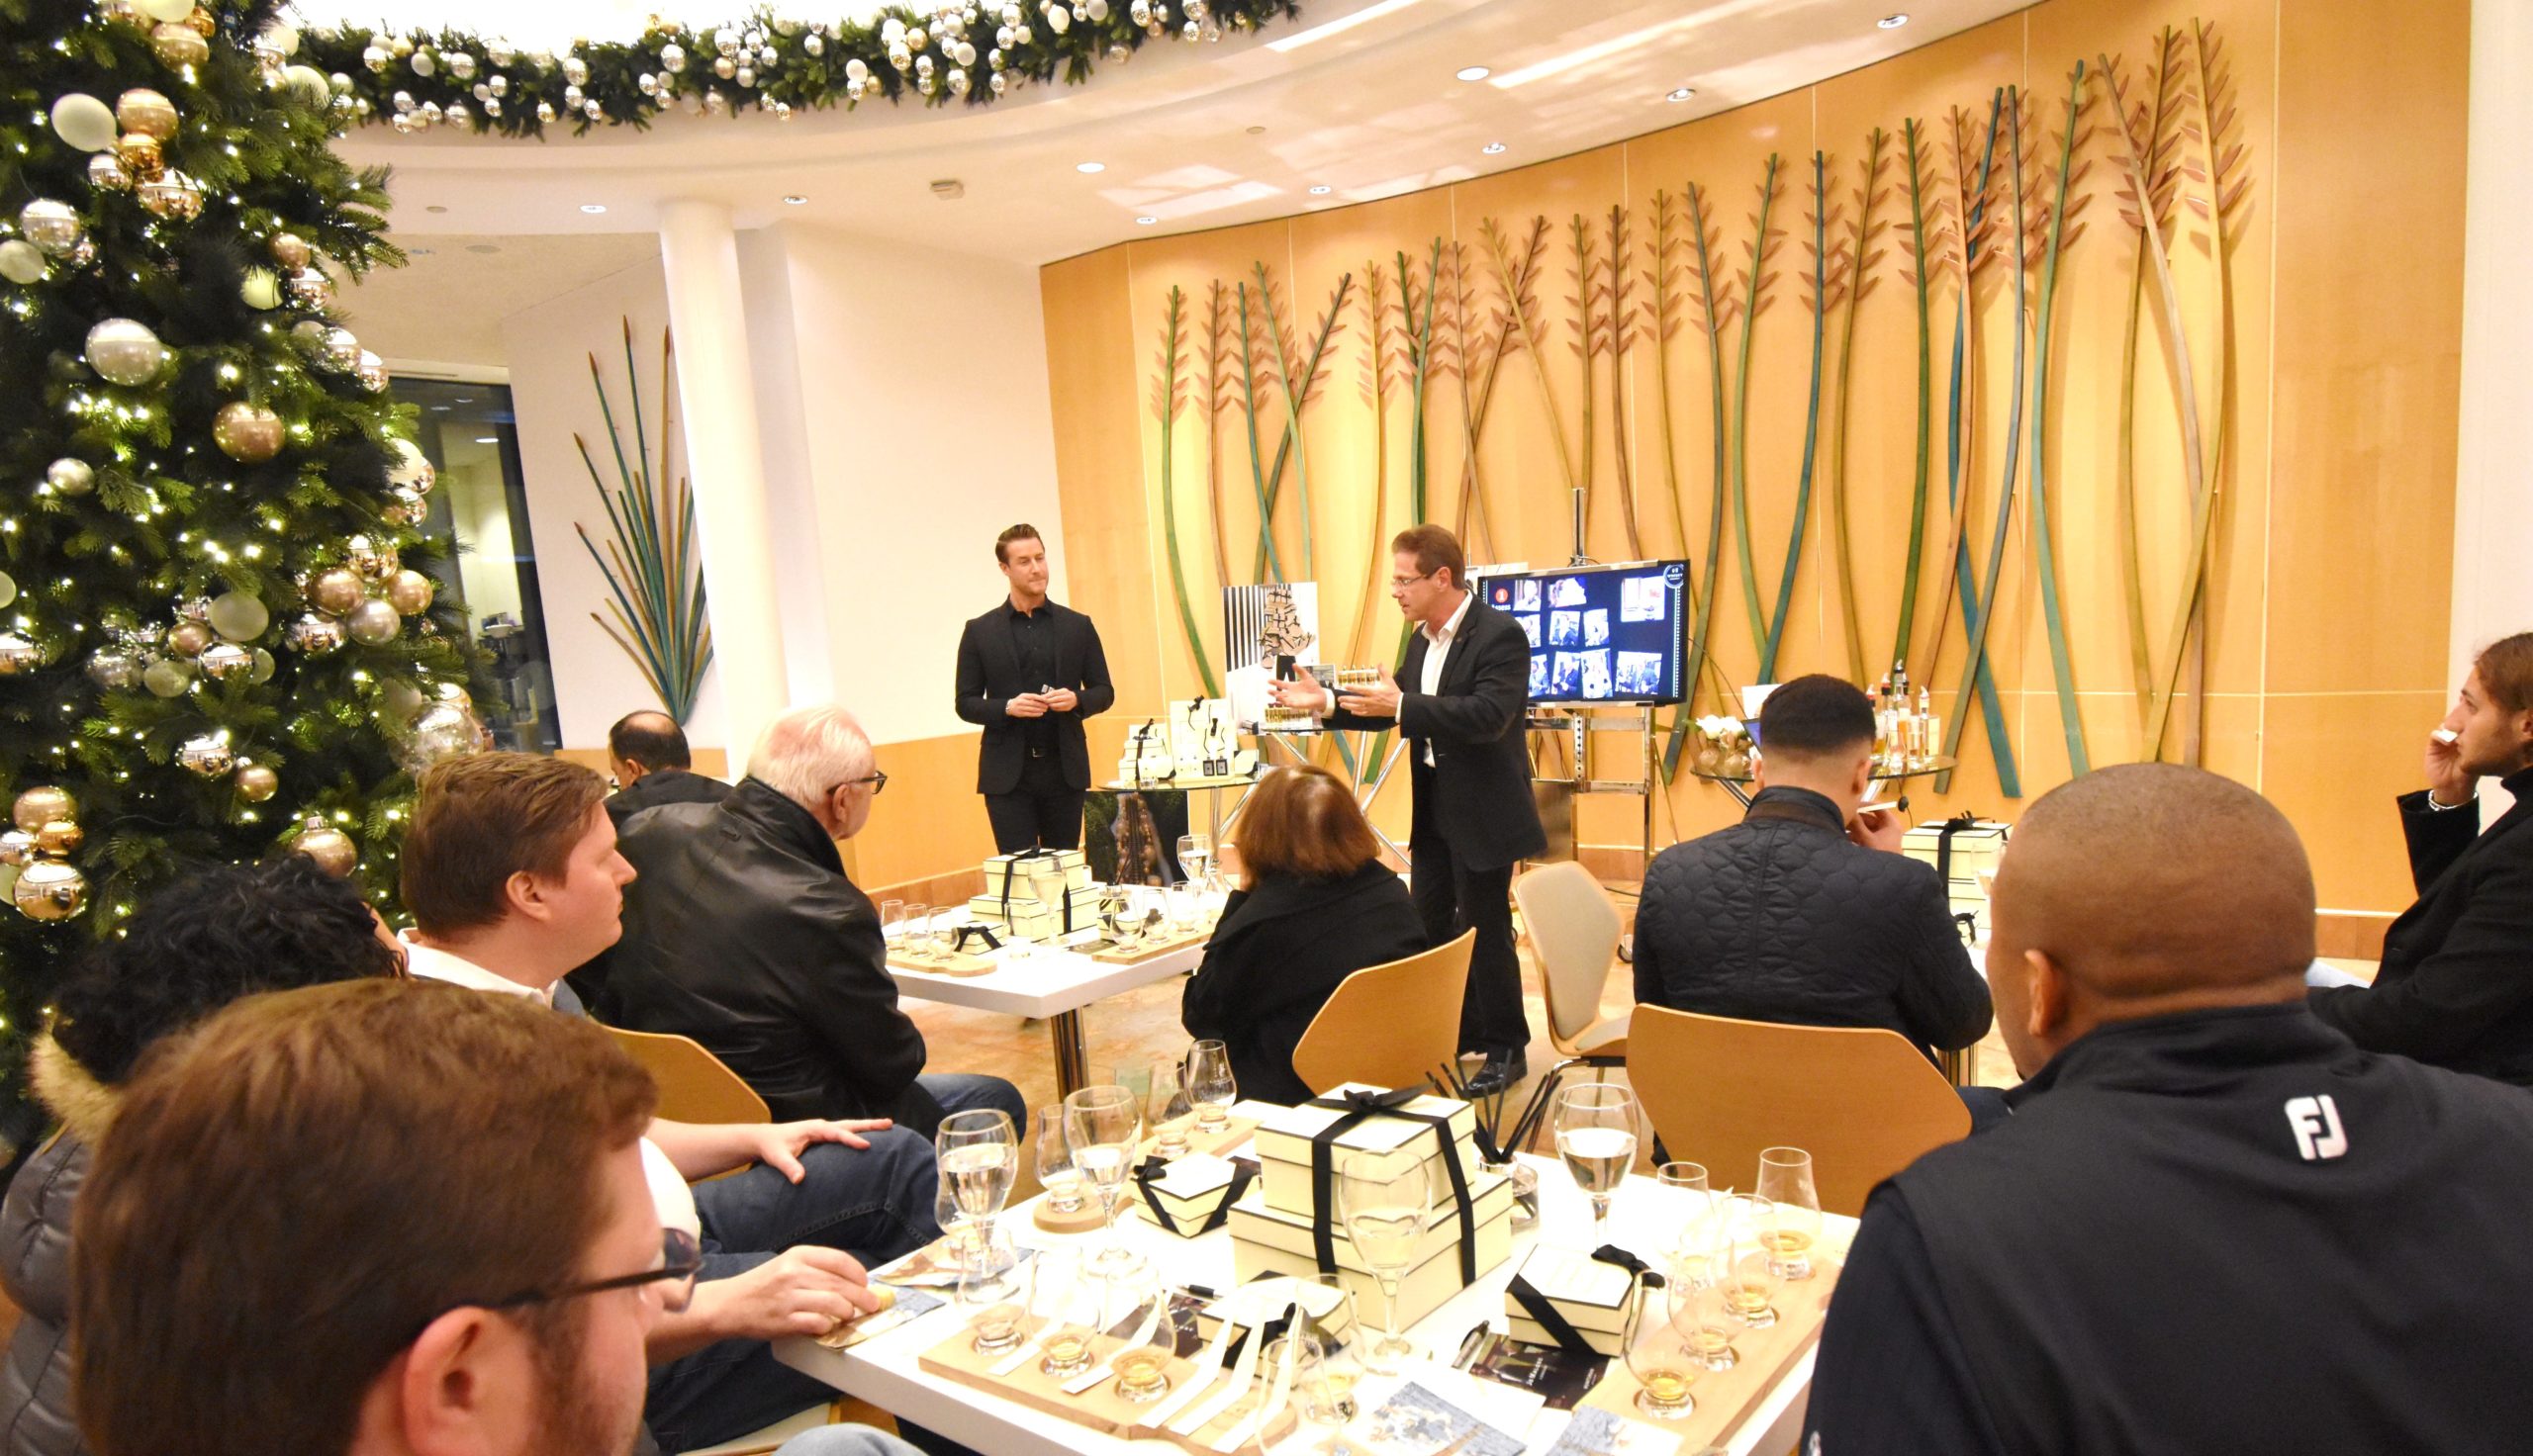 Jo Malone launches its new collection in New Jersey with Whisky Gourmet!